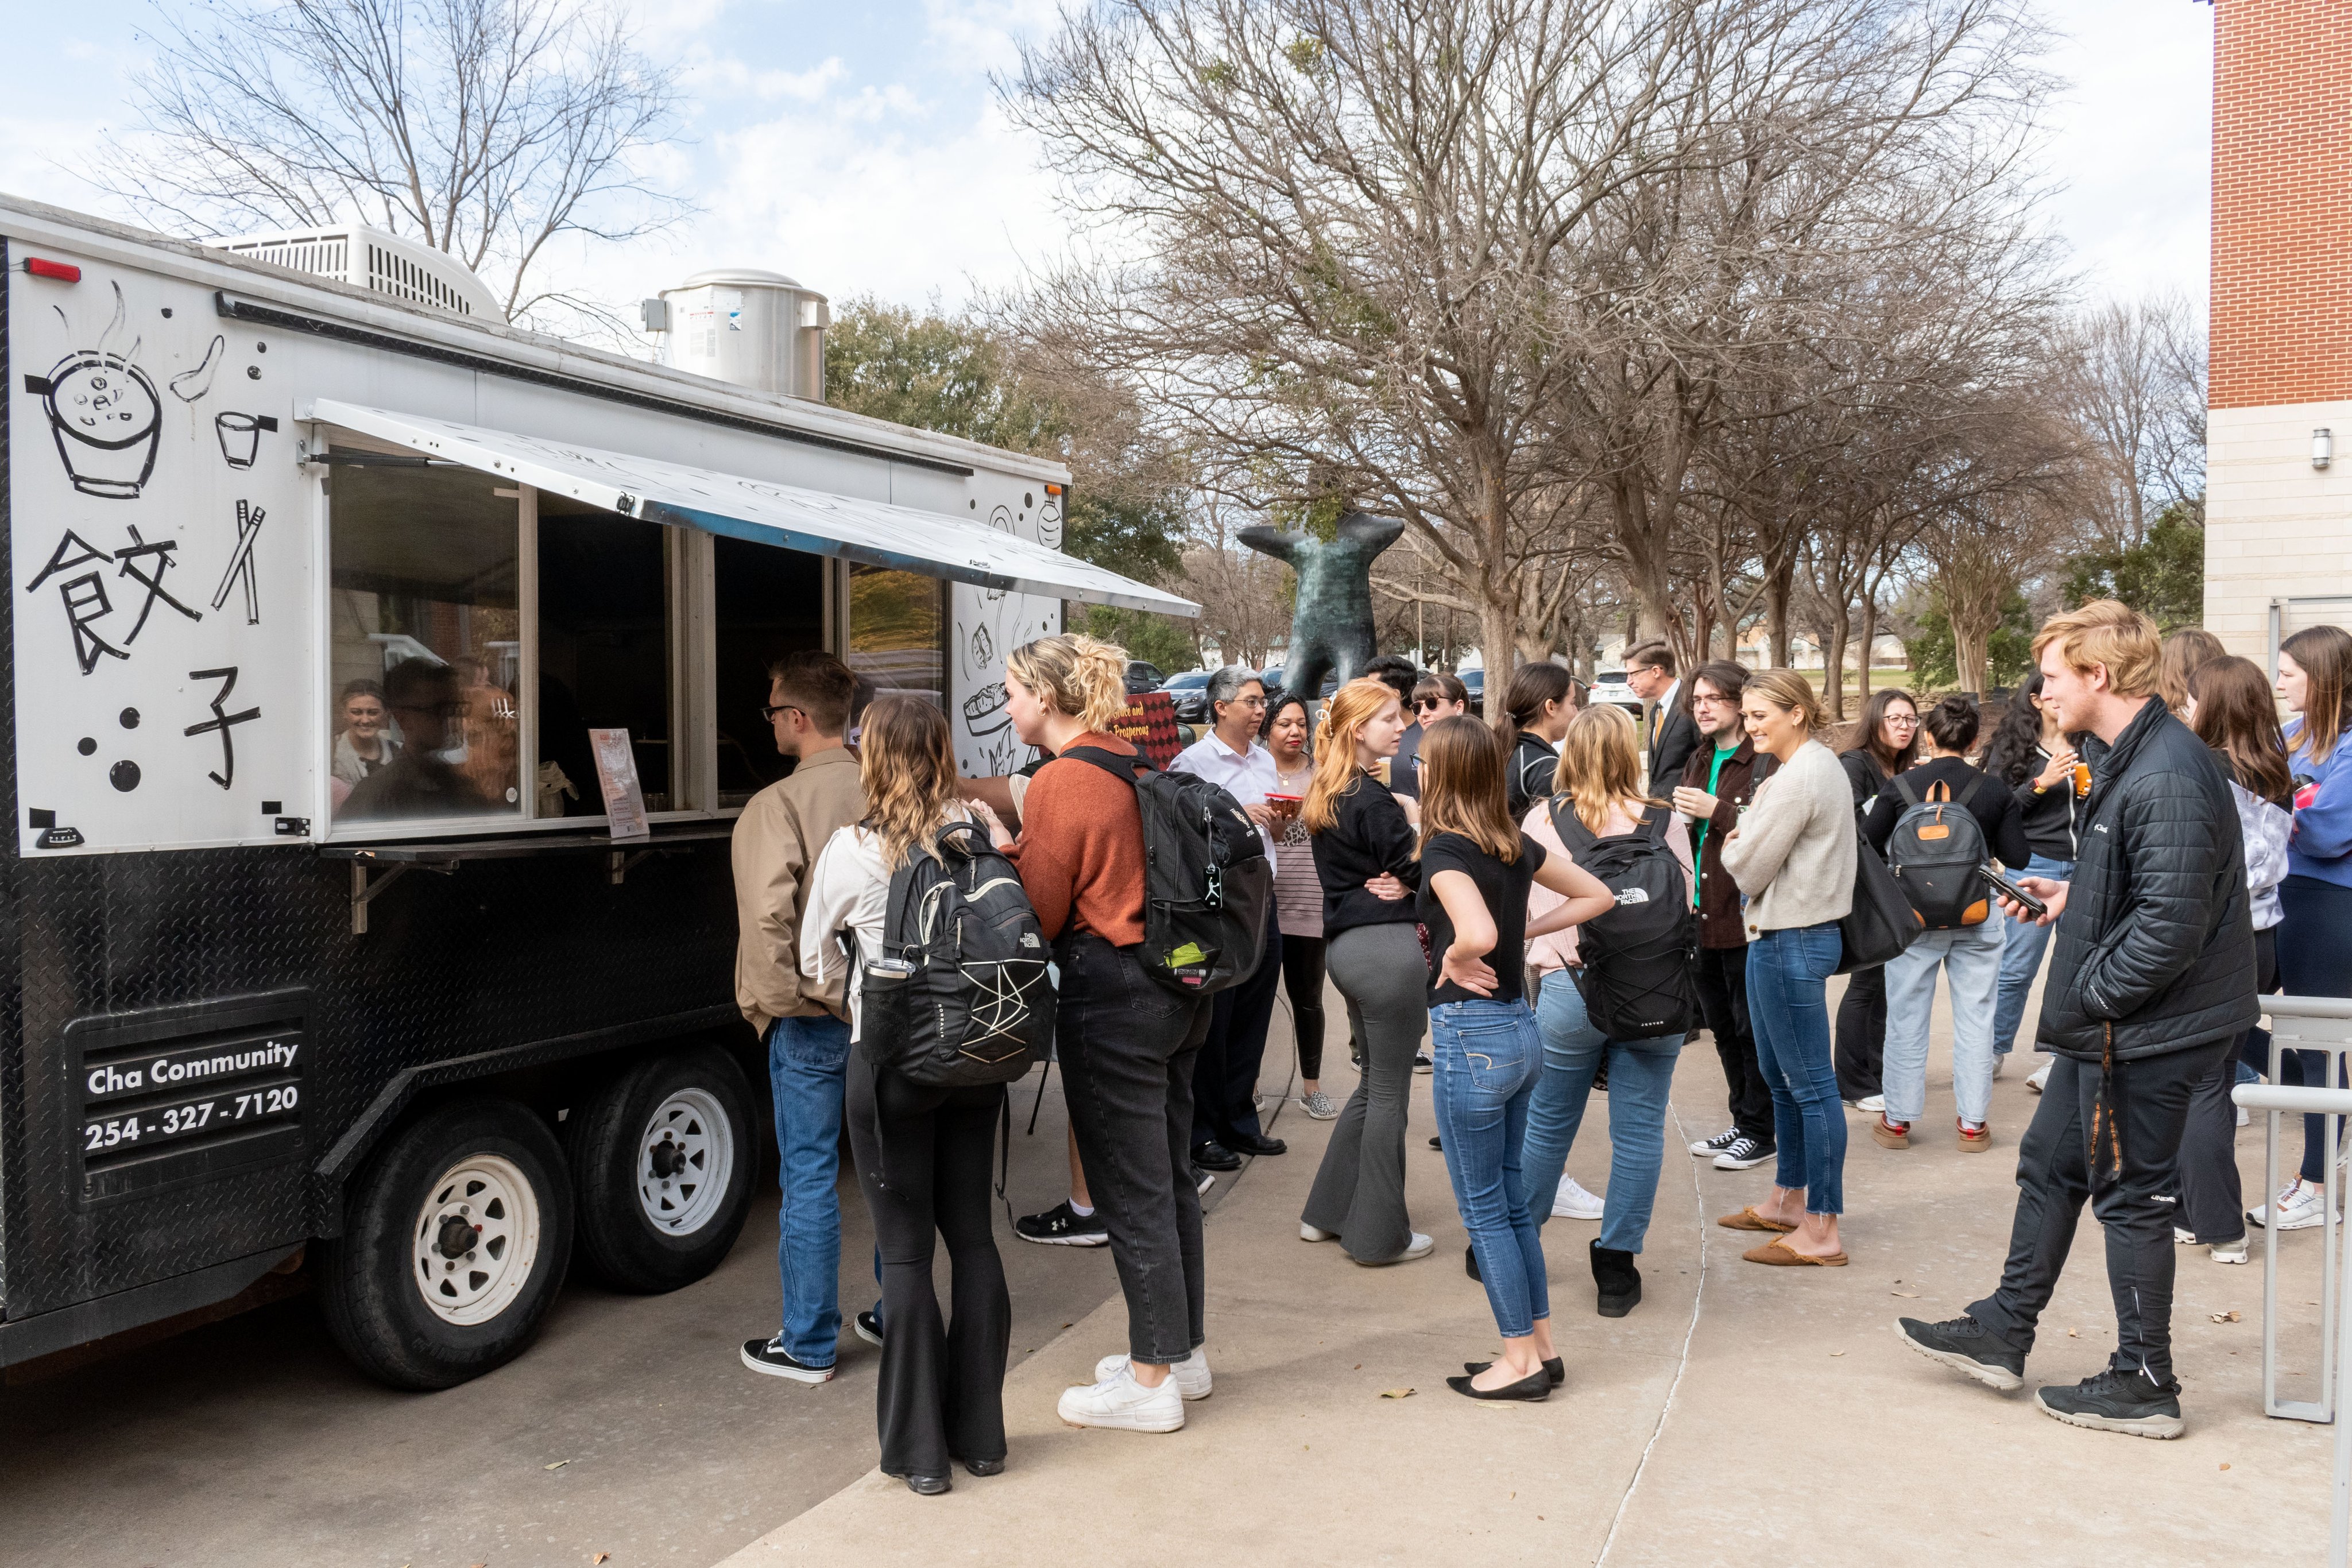 Students line up in front of Waco Cha truck to order Boba tea